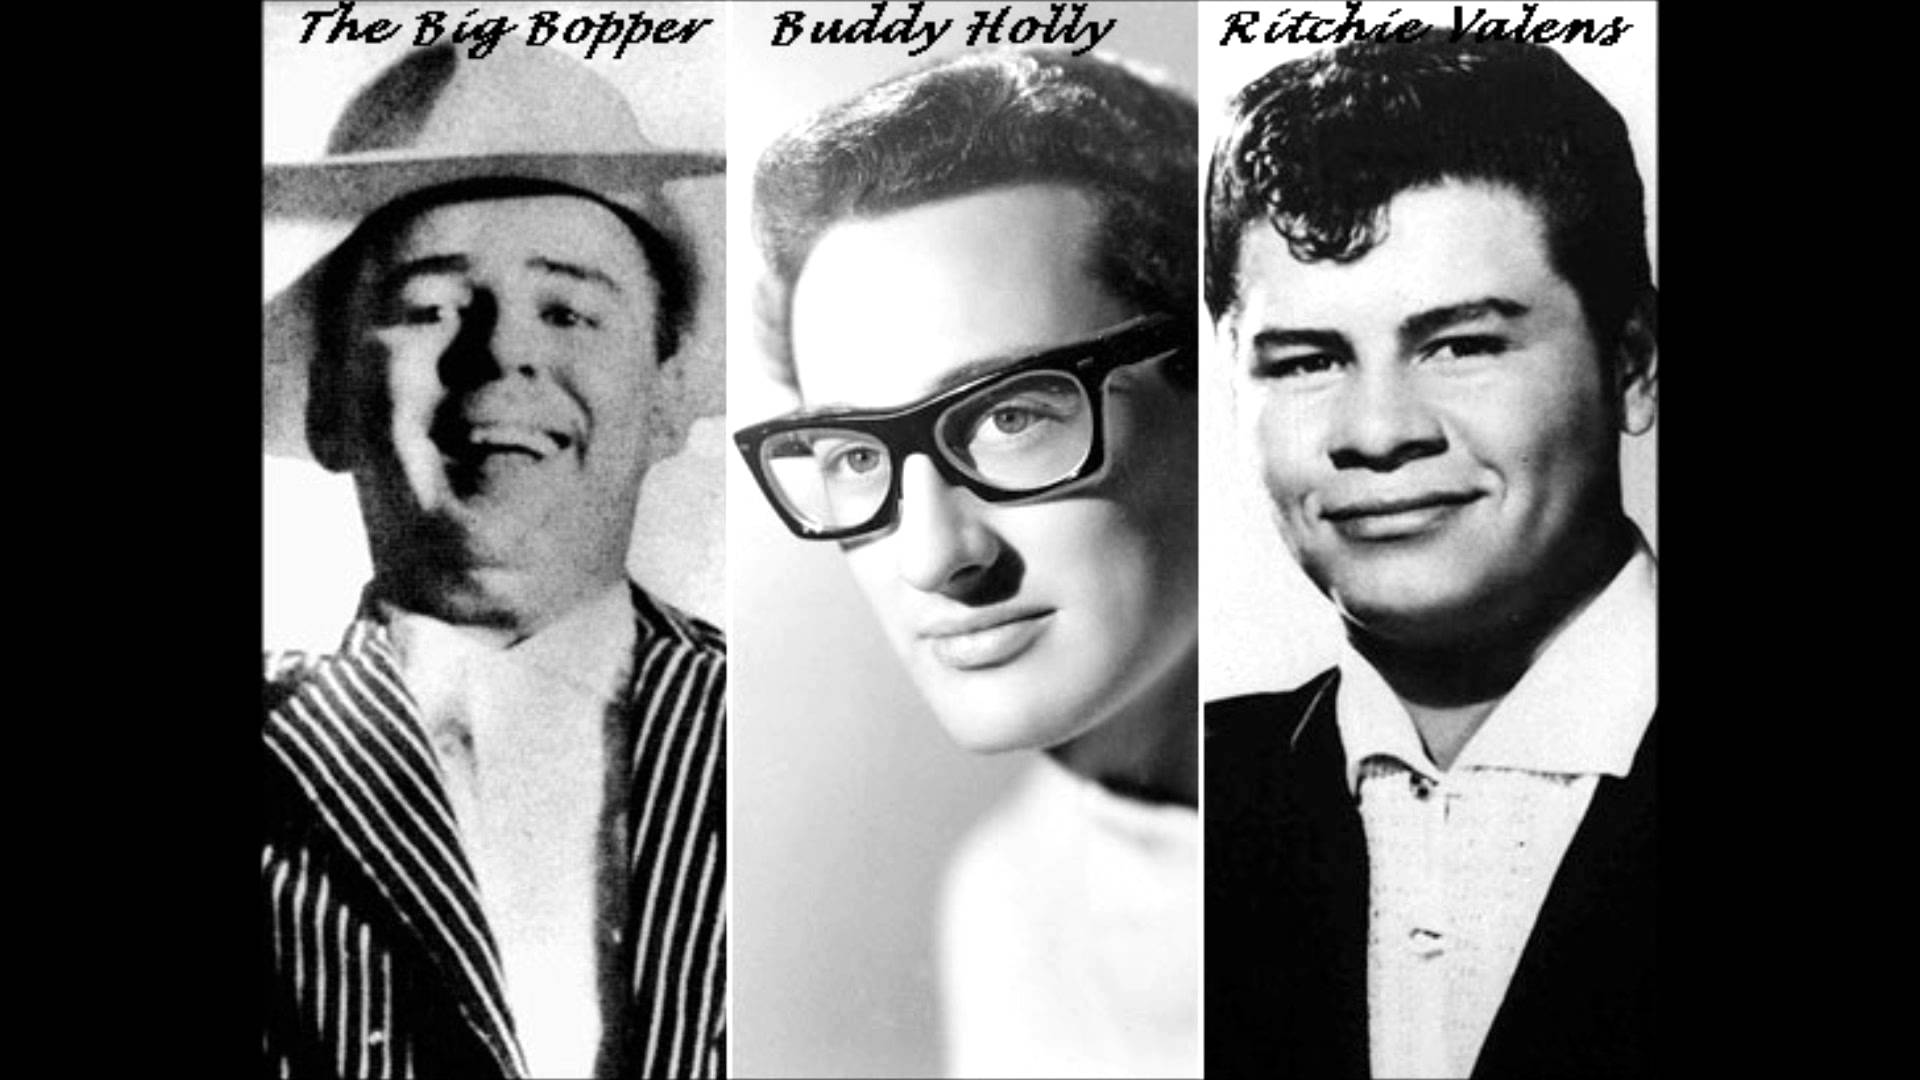 image For > Buddy Holly And Ritchie Valens